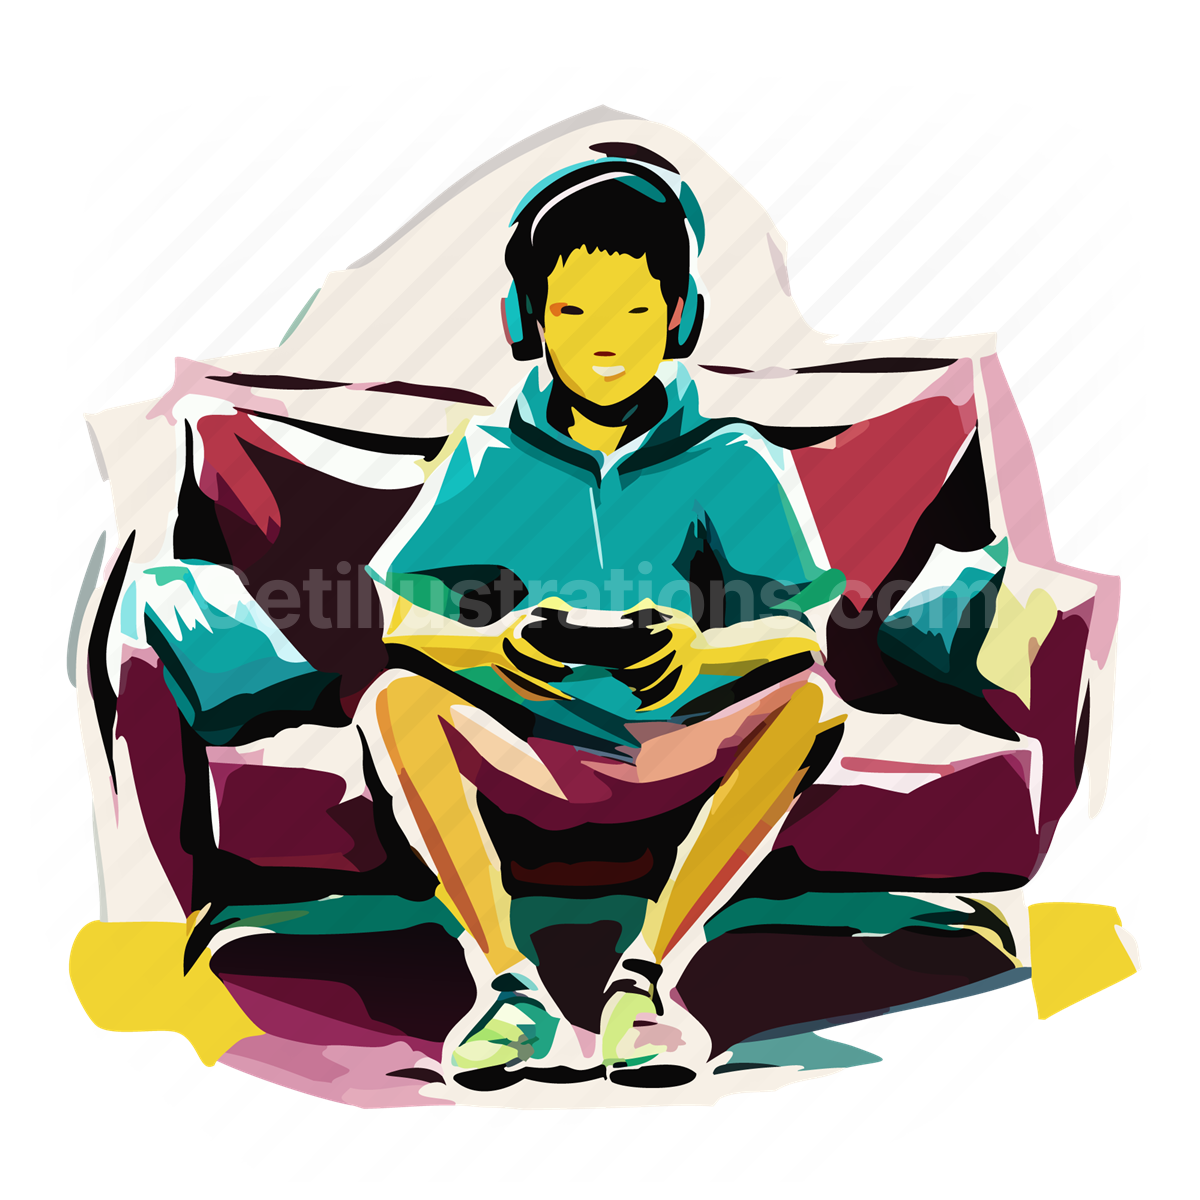 gaming, video game, boy, people, person, chair, sofa, couch, furniture, furnishing